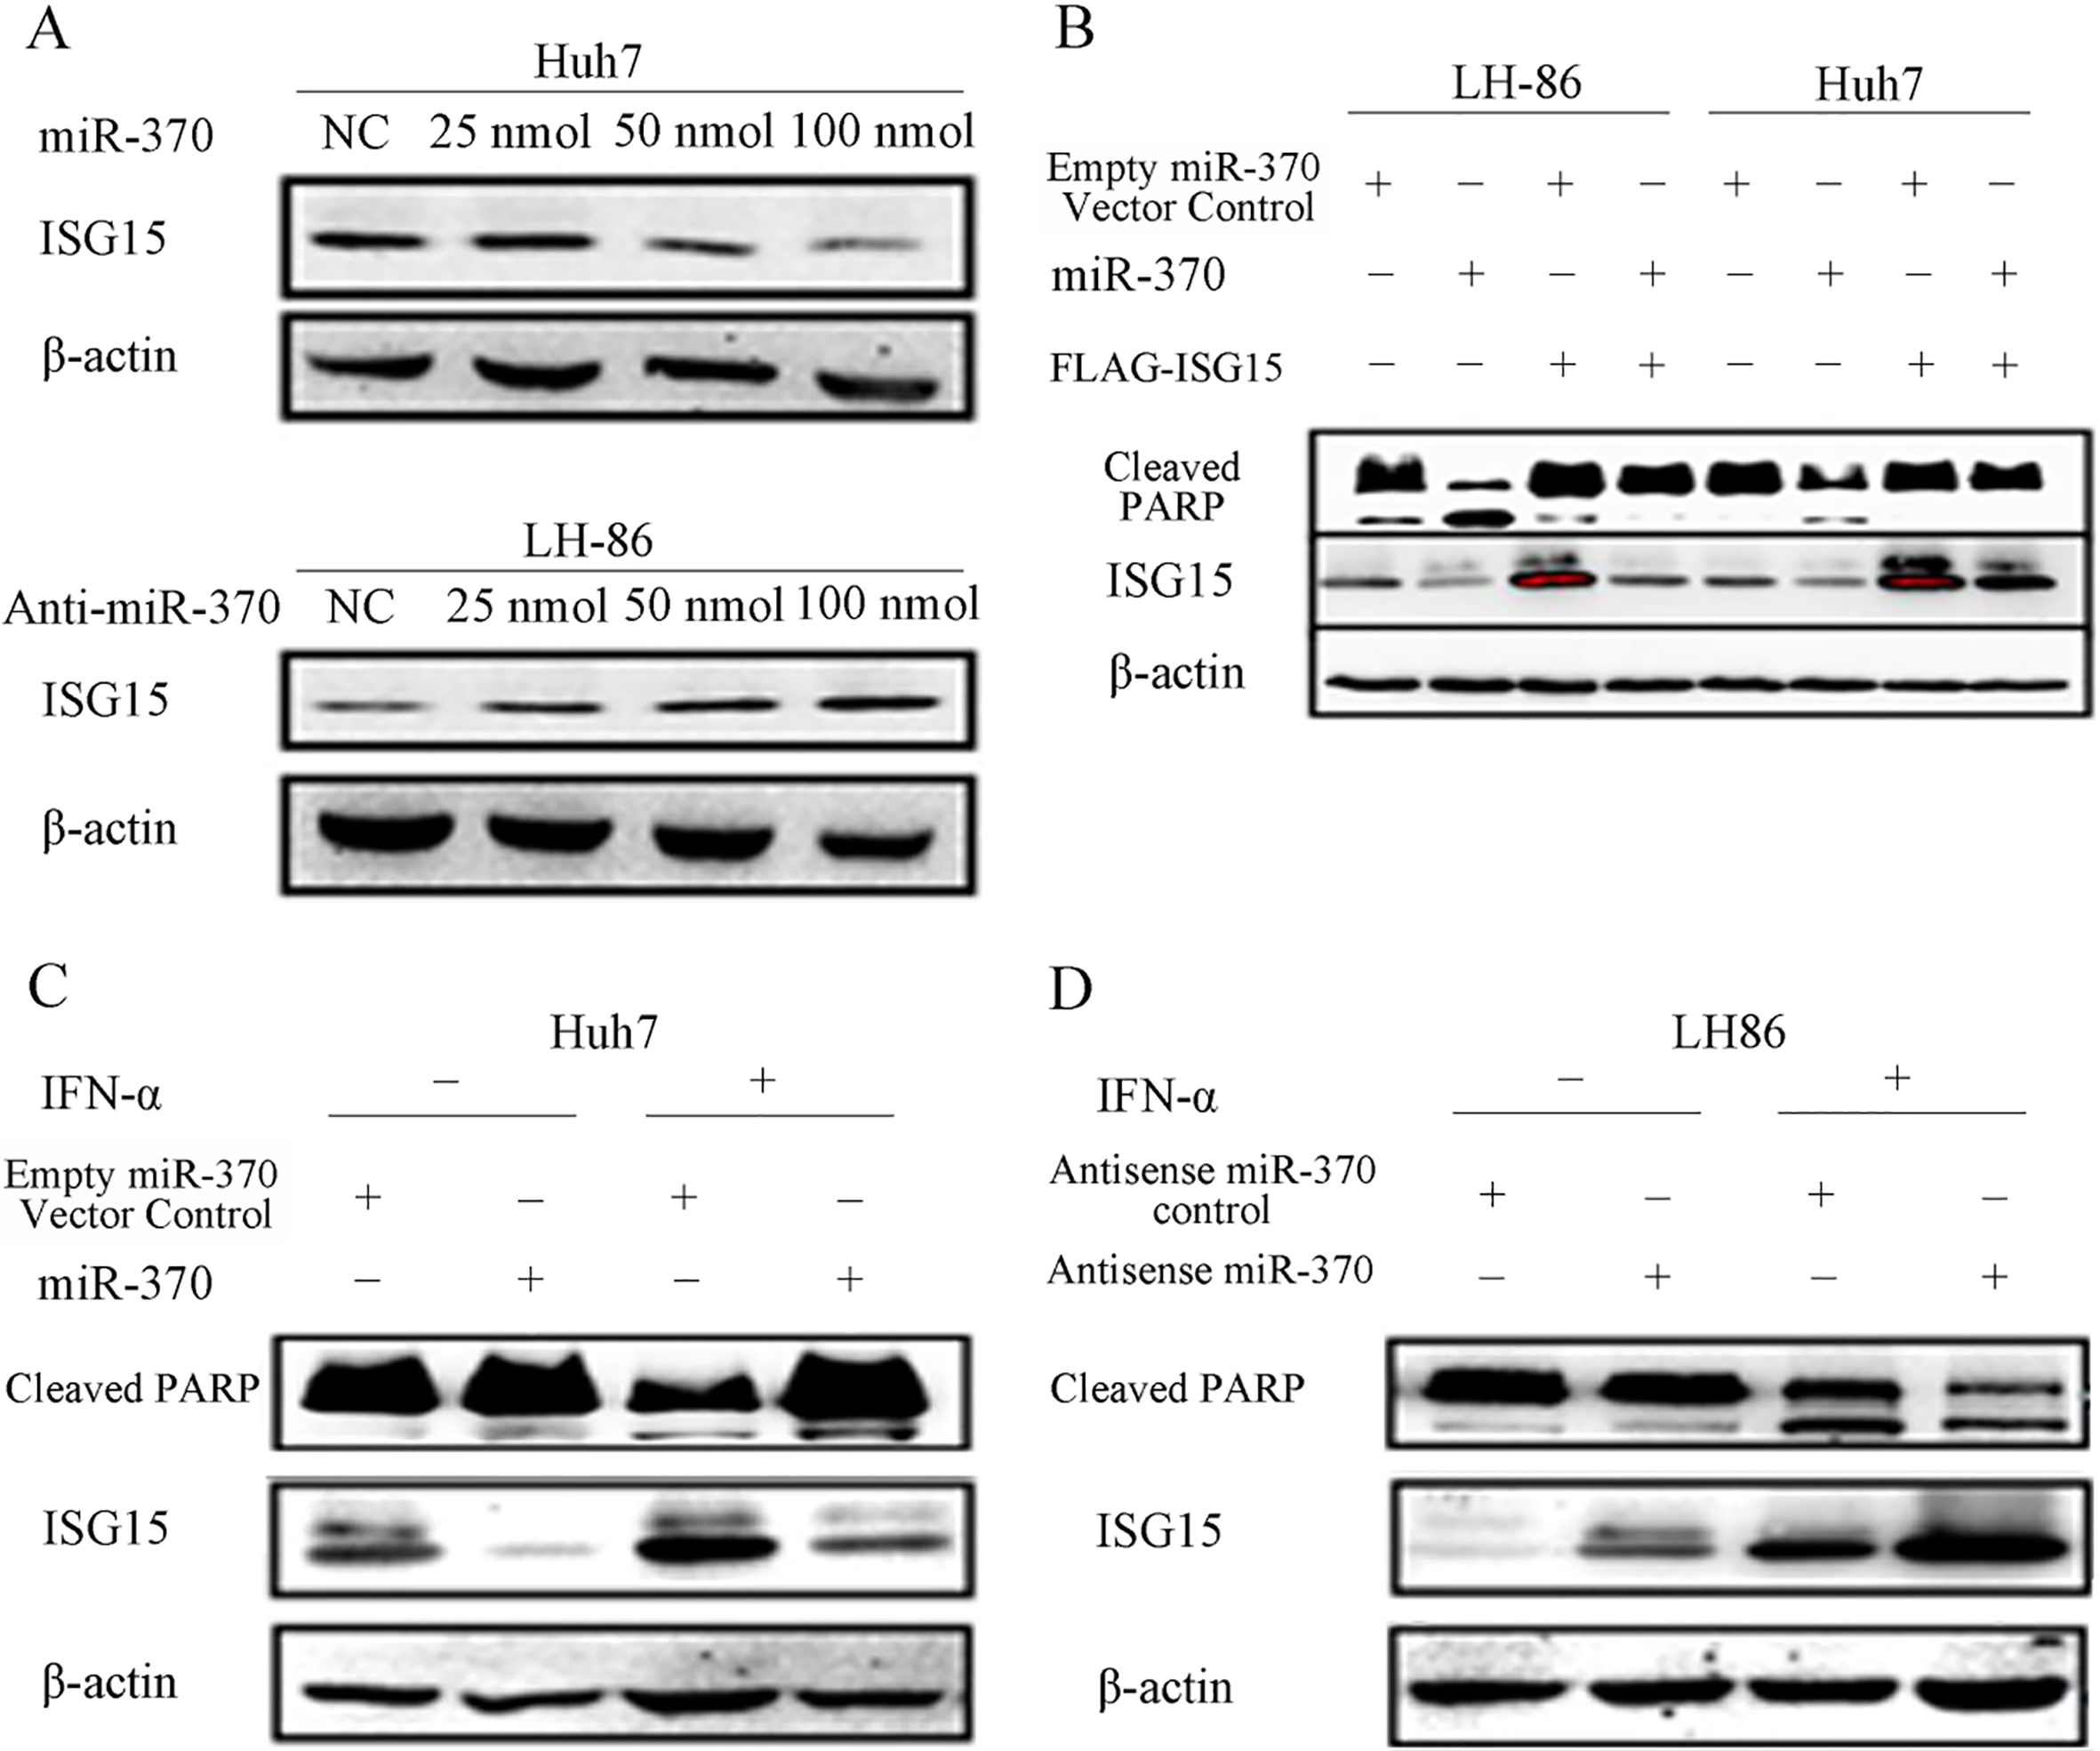 Effects of miR-370 on ISG15 expression and PARP cleavage. (A) Huh7 and LH86 cells were transfected with 25, 50 or 100 nmol miR-370 or anti-miR-370 siRNA for 24 h before assessing the levels of ISG15 and actin (loading control) proteins by western blotting. (B) After transfection with 100 nmol miR-370 and/or pFLAG-ISG15 for 24 h, LH86 and Huh7 cells were subjected to western blotting to assess the levels of cleaved PARP, ISG15, and actin proteins. (C and D) After treatment with or without 2,000 IU/mL IFN-α for 48 h, Huh7 and LH86 cells were transfected with 100 nmol miR-370 or anti-miR-370 siRNA for 24 h, and the levels of cleaved PARP, ISG15, and actin proteins were assessed by western blotting. The data presented are representative of 3 independent experiments. 